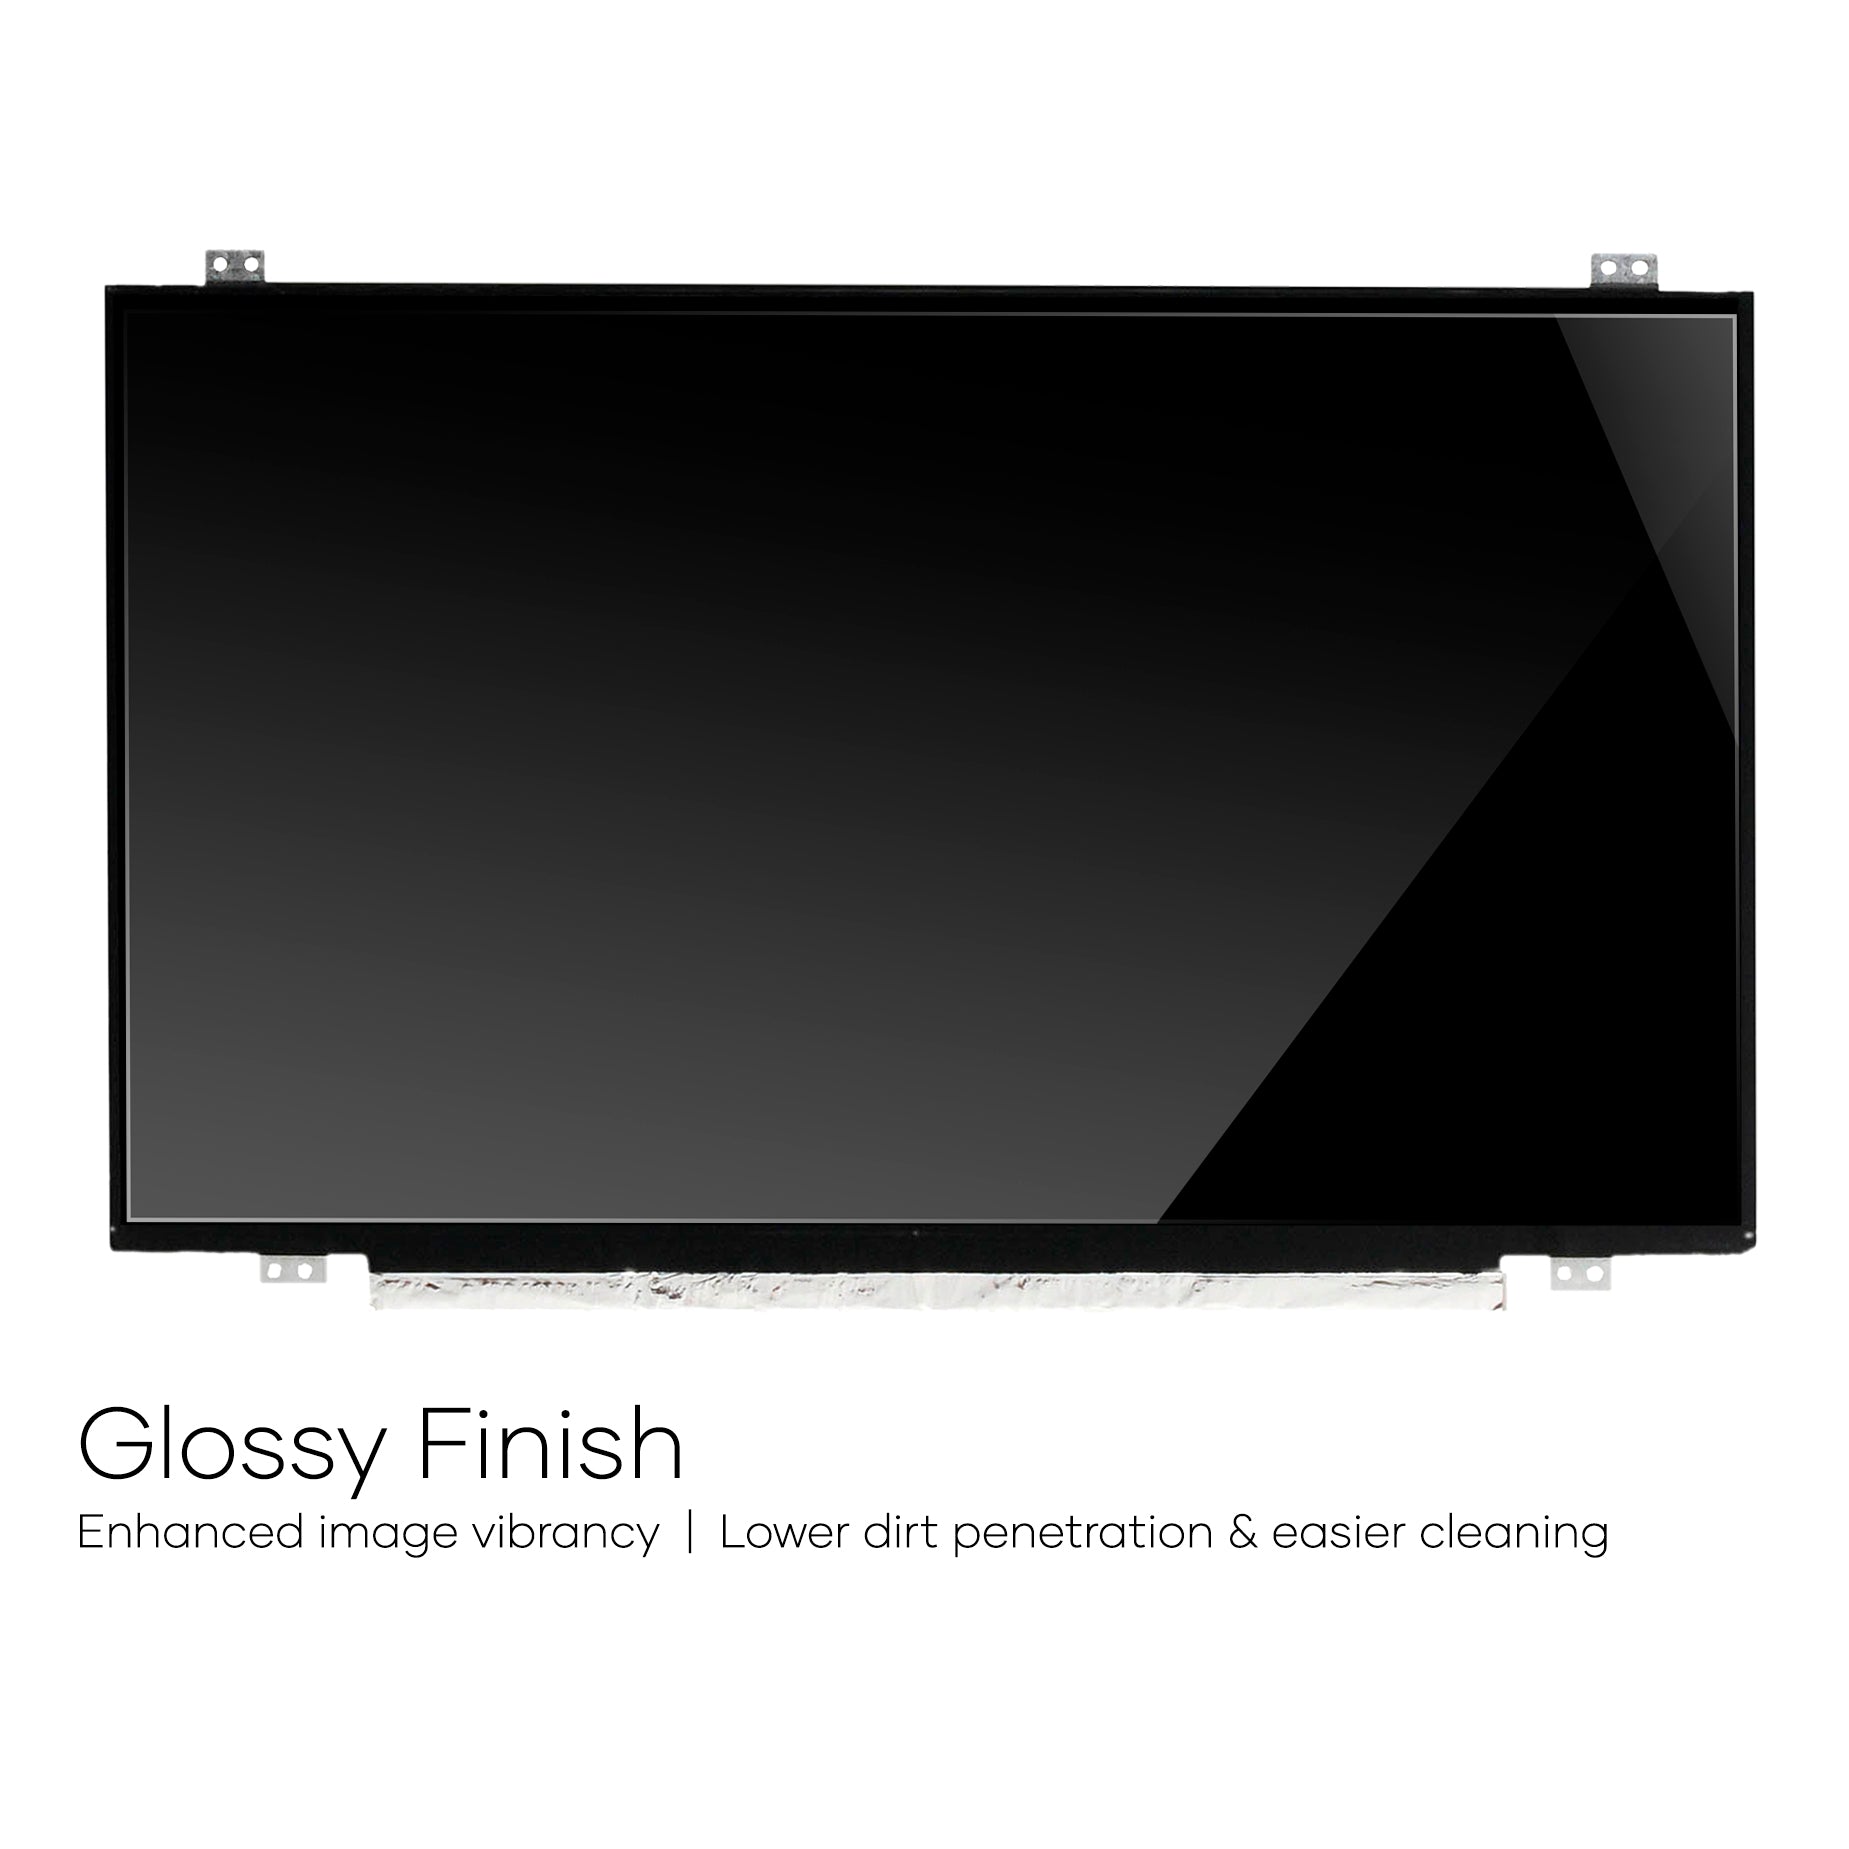 Screen Replacement for NT140WHM-N41 V8.0 HD 1366x768 Glossy LCD LED Display